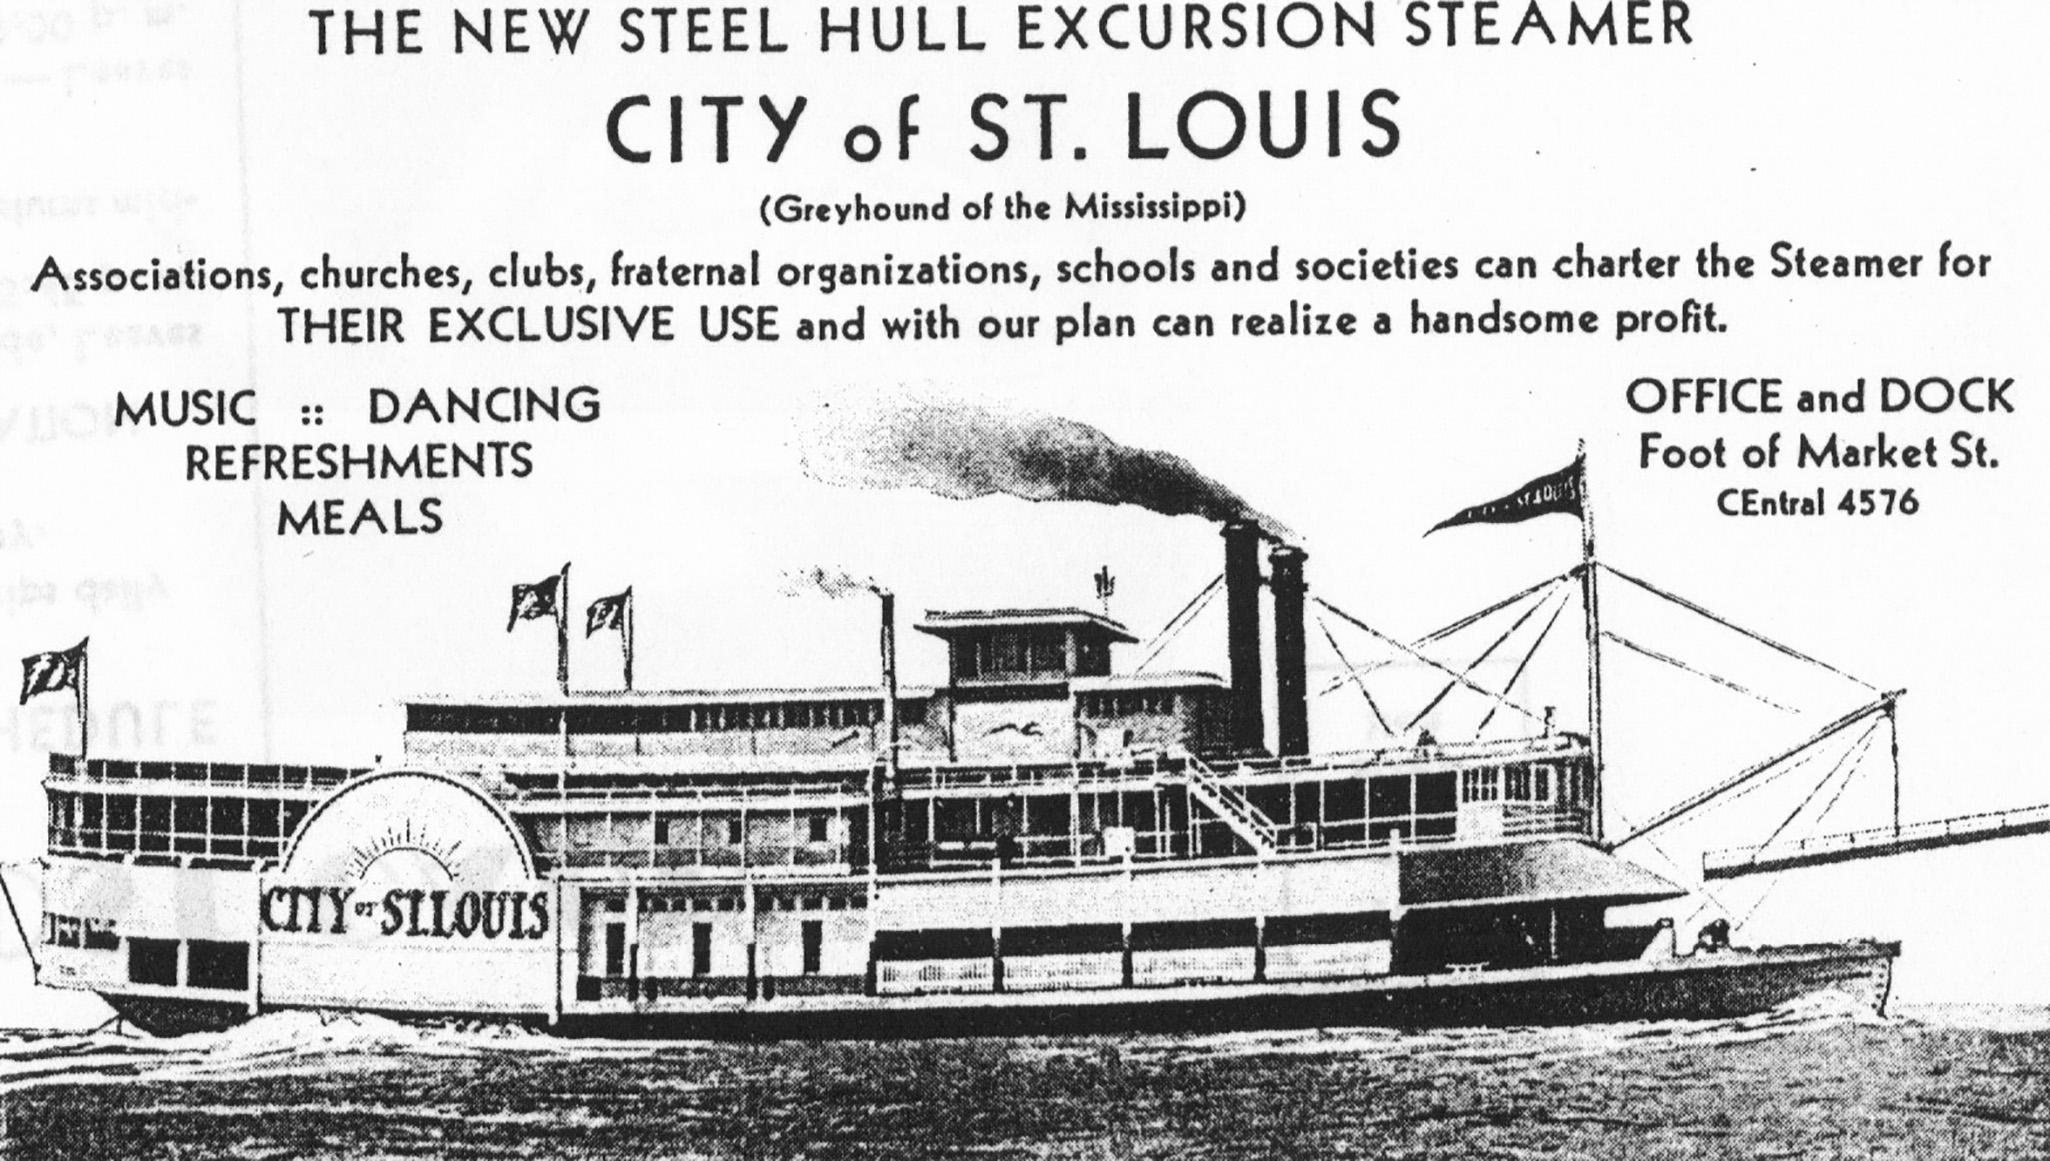 The City Of St. Louis - The Waterways Journal